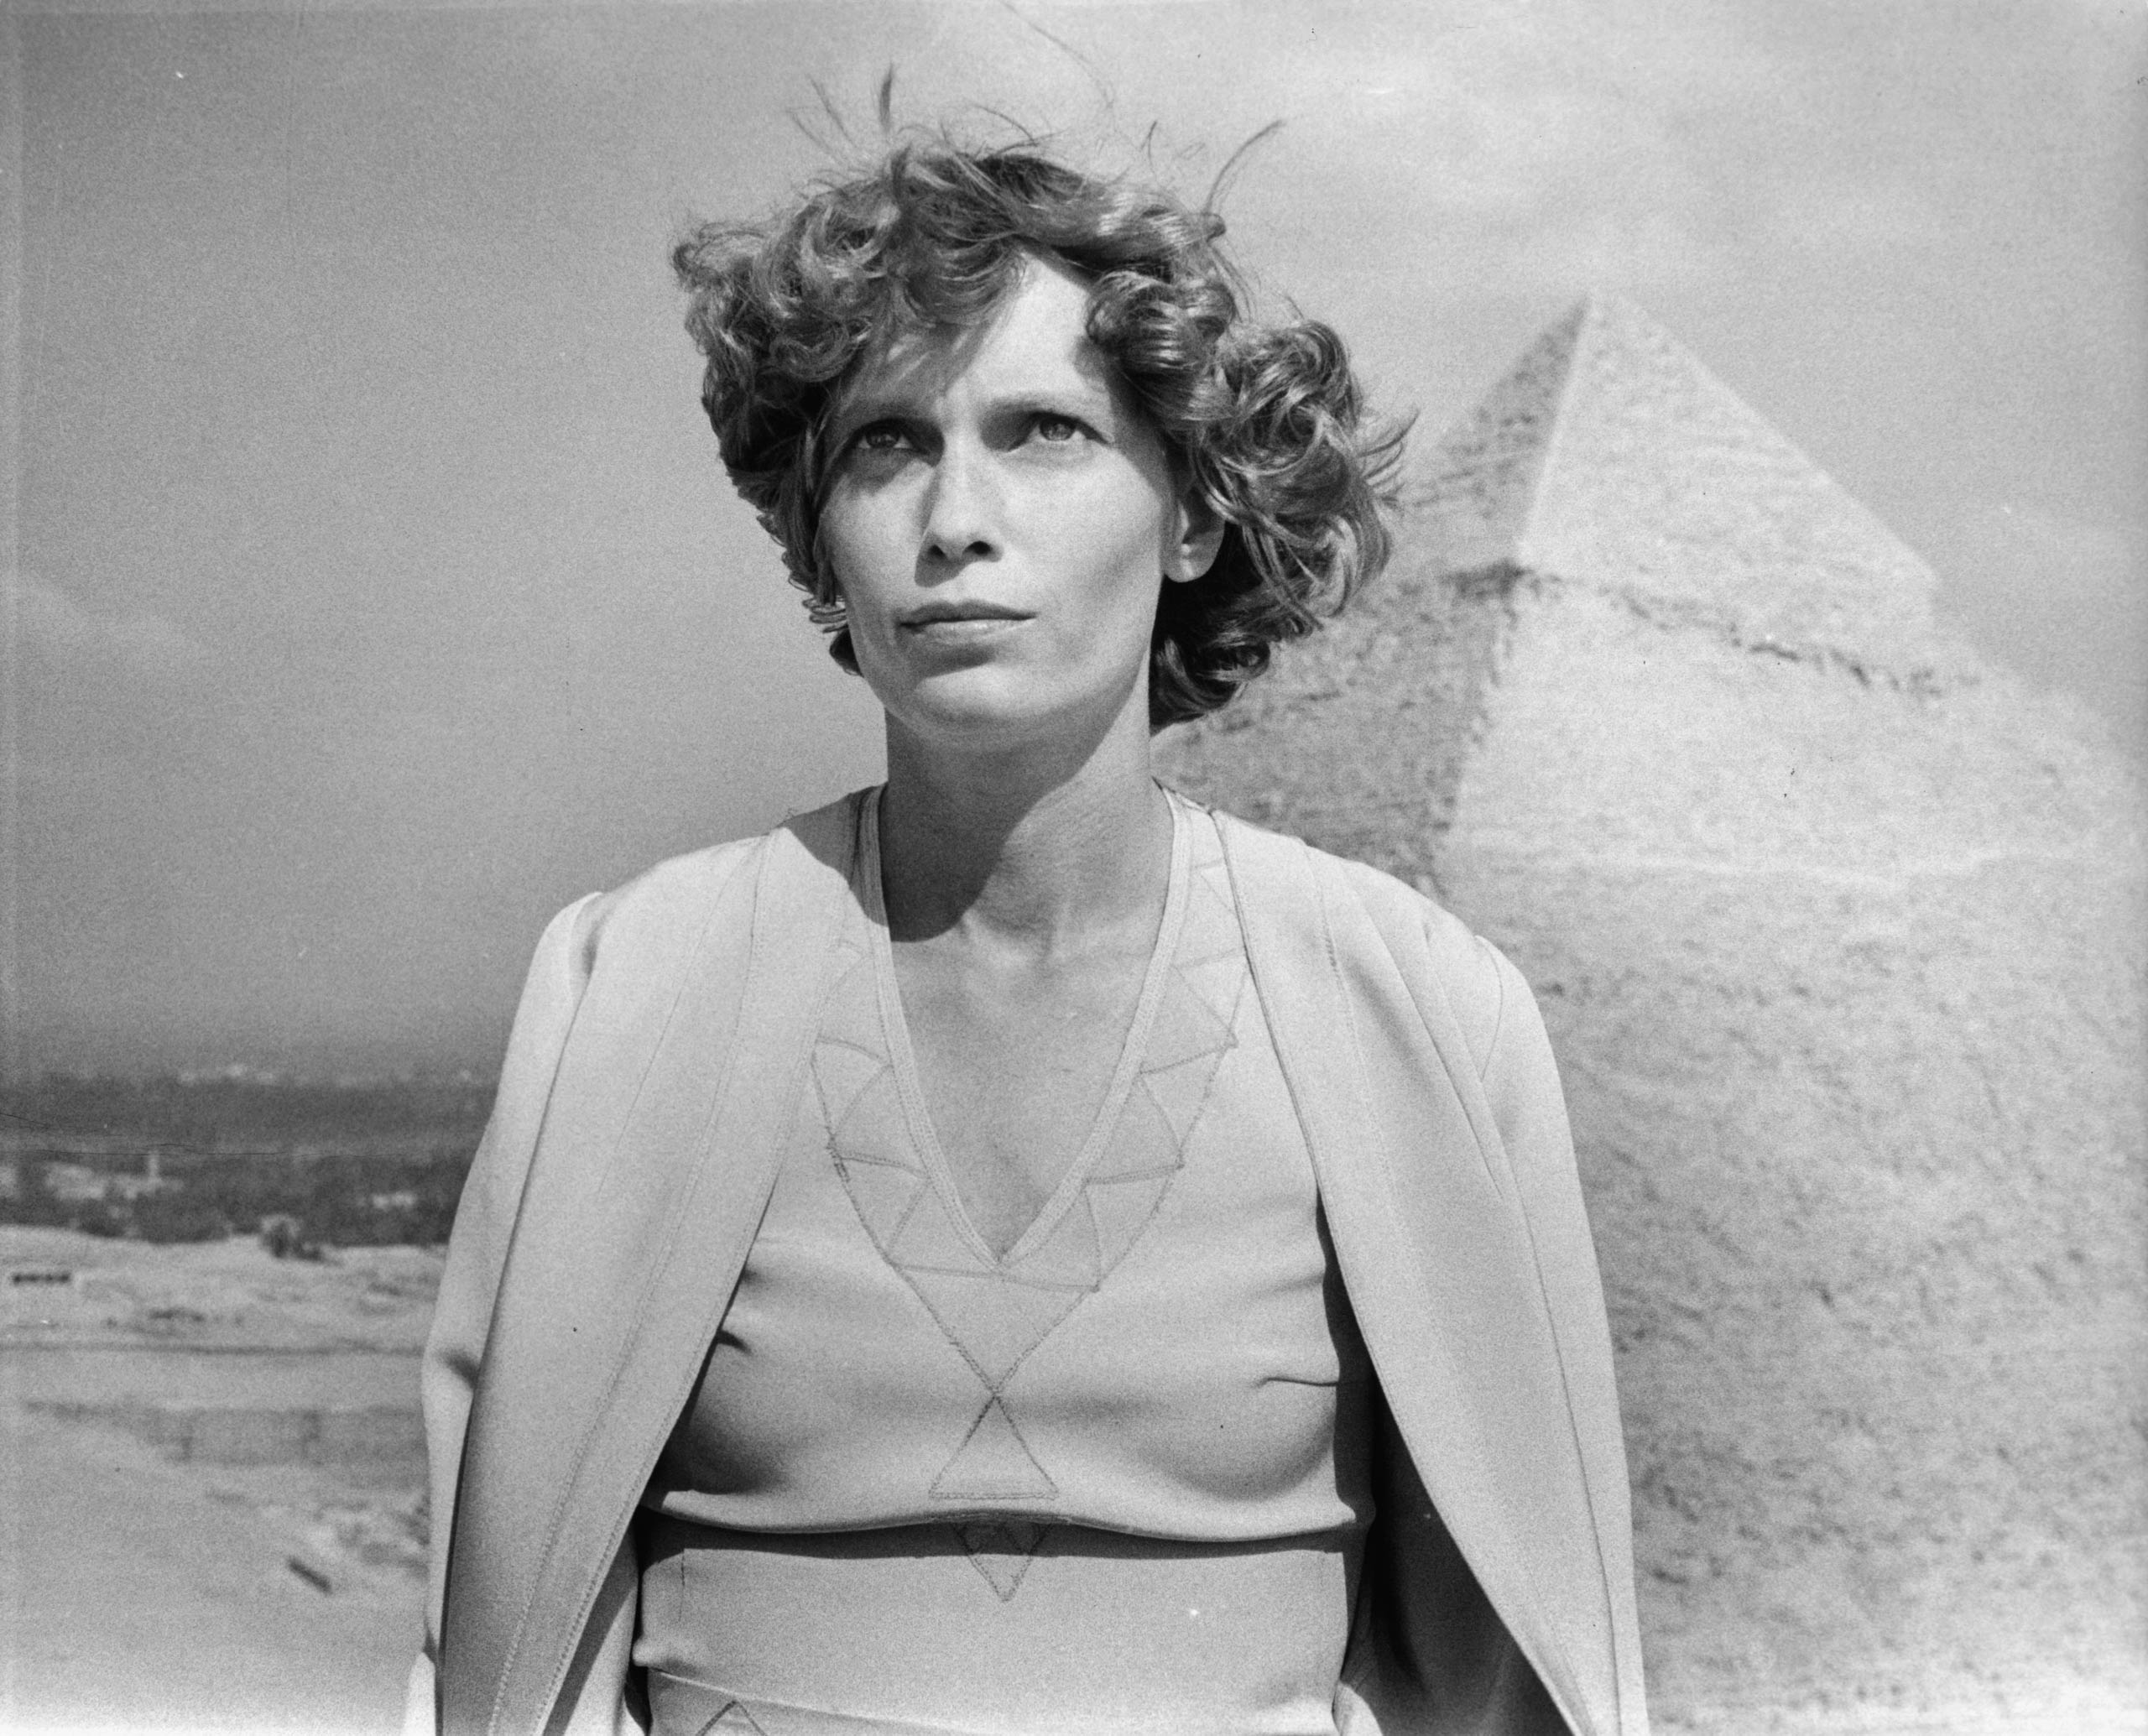 Mia Farrow in front of the Great Pyramids in a scene from the film Death On The Nile, 1978.